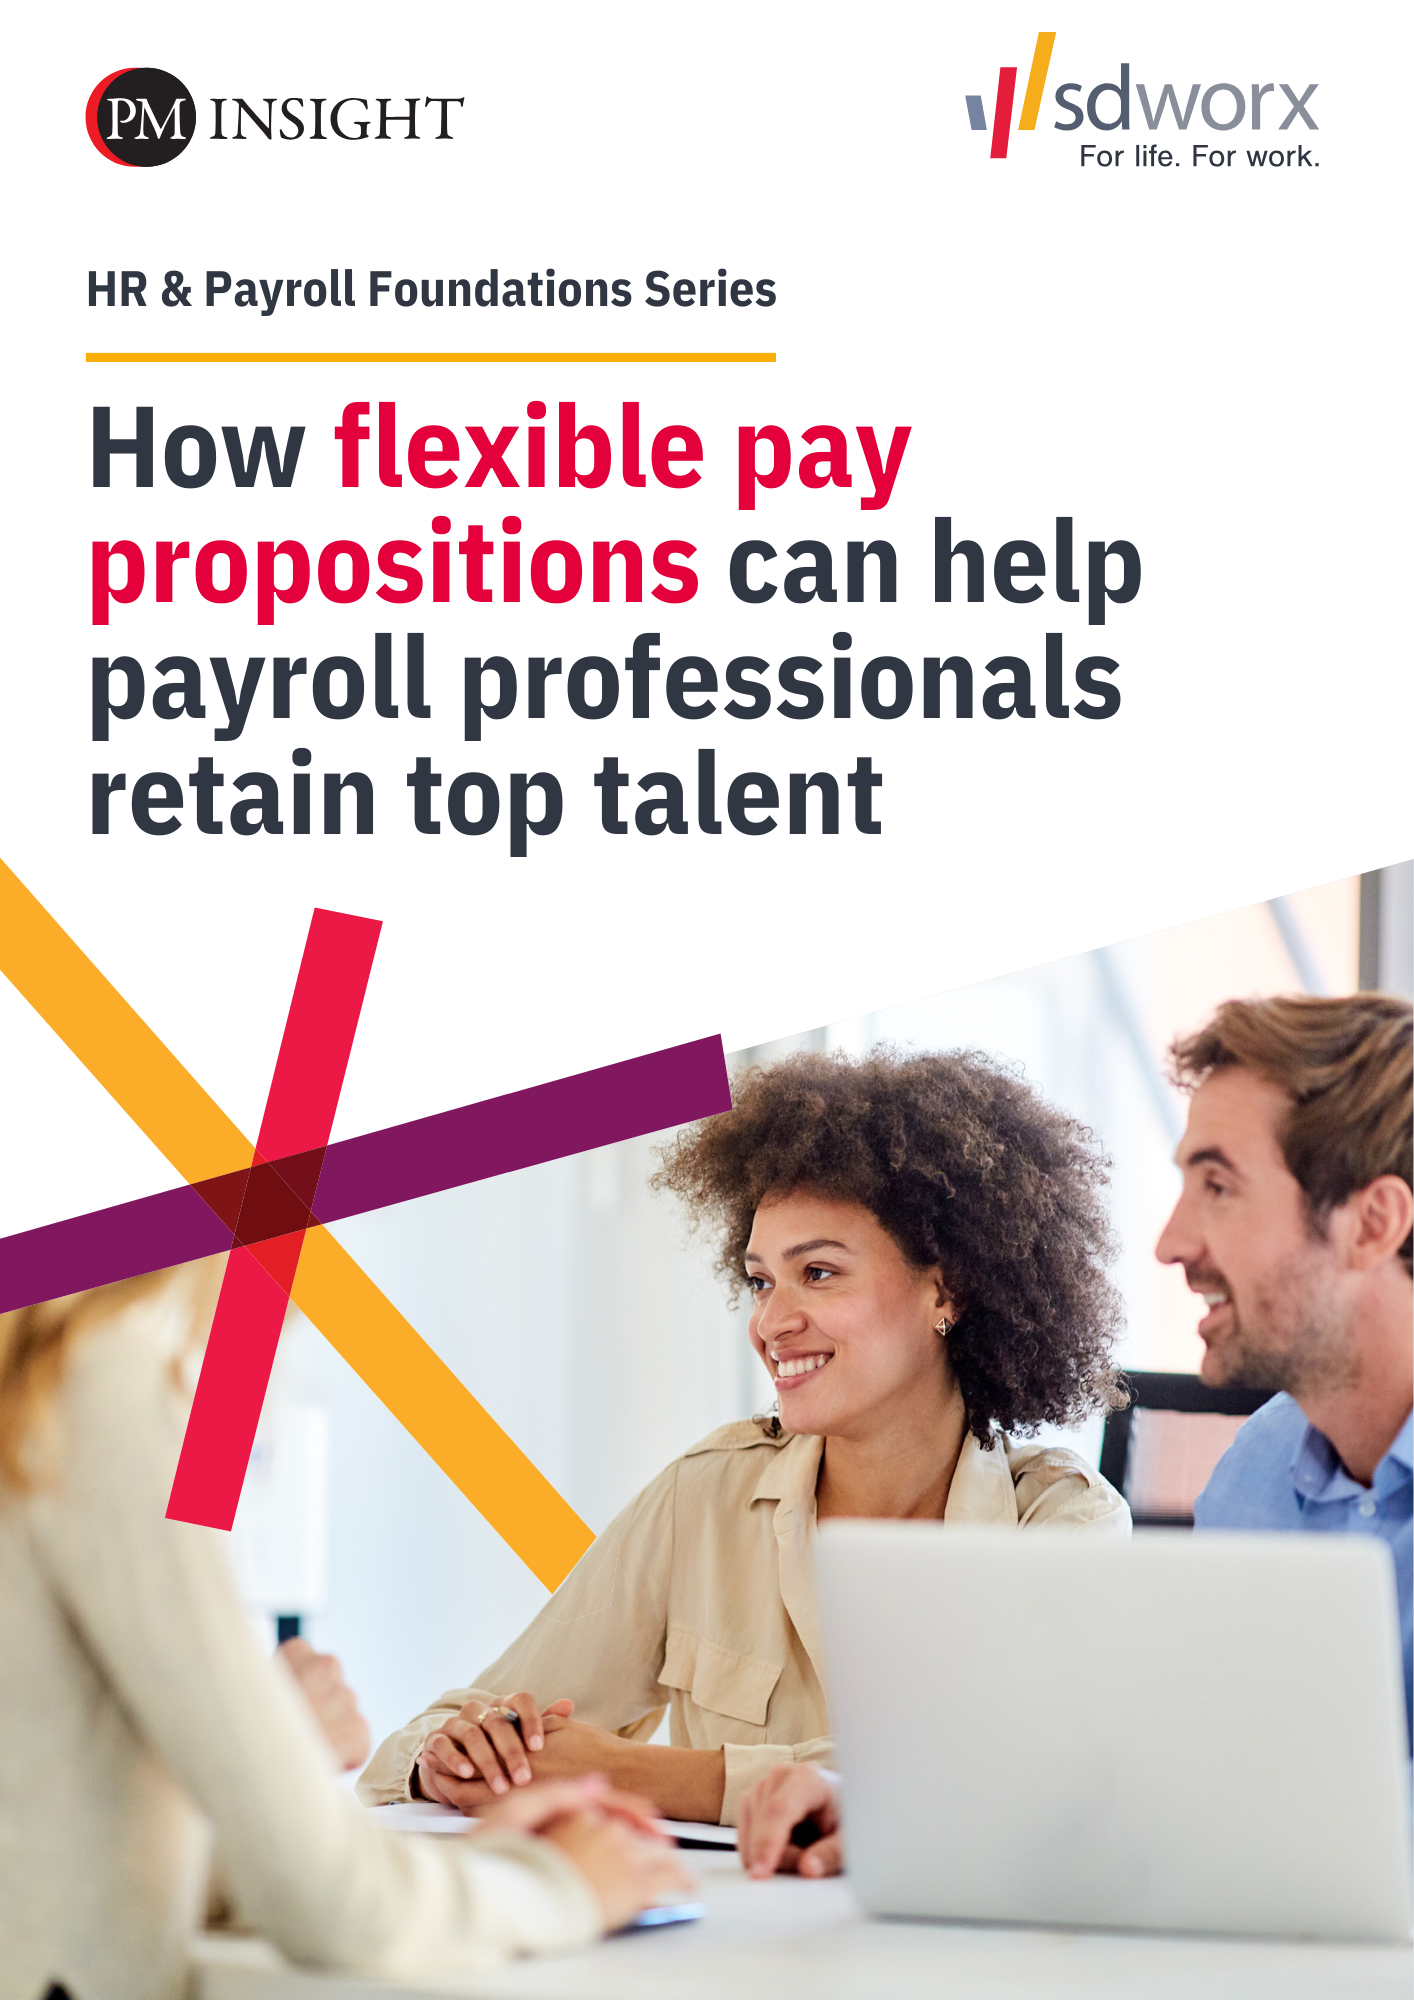 How flexible pay propositions can help payroll professionals retain top talent